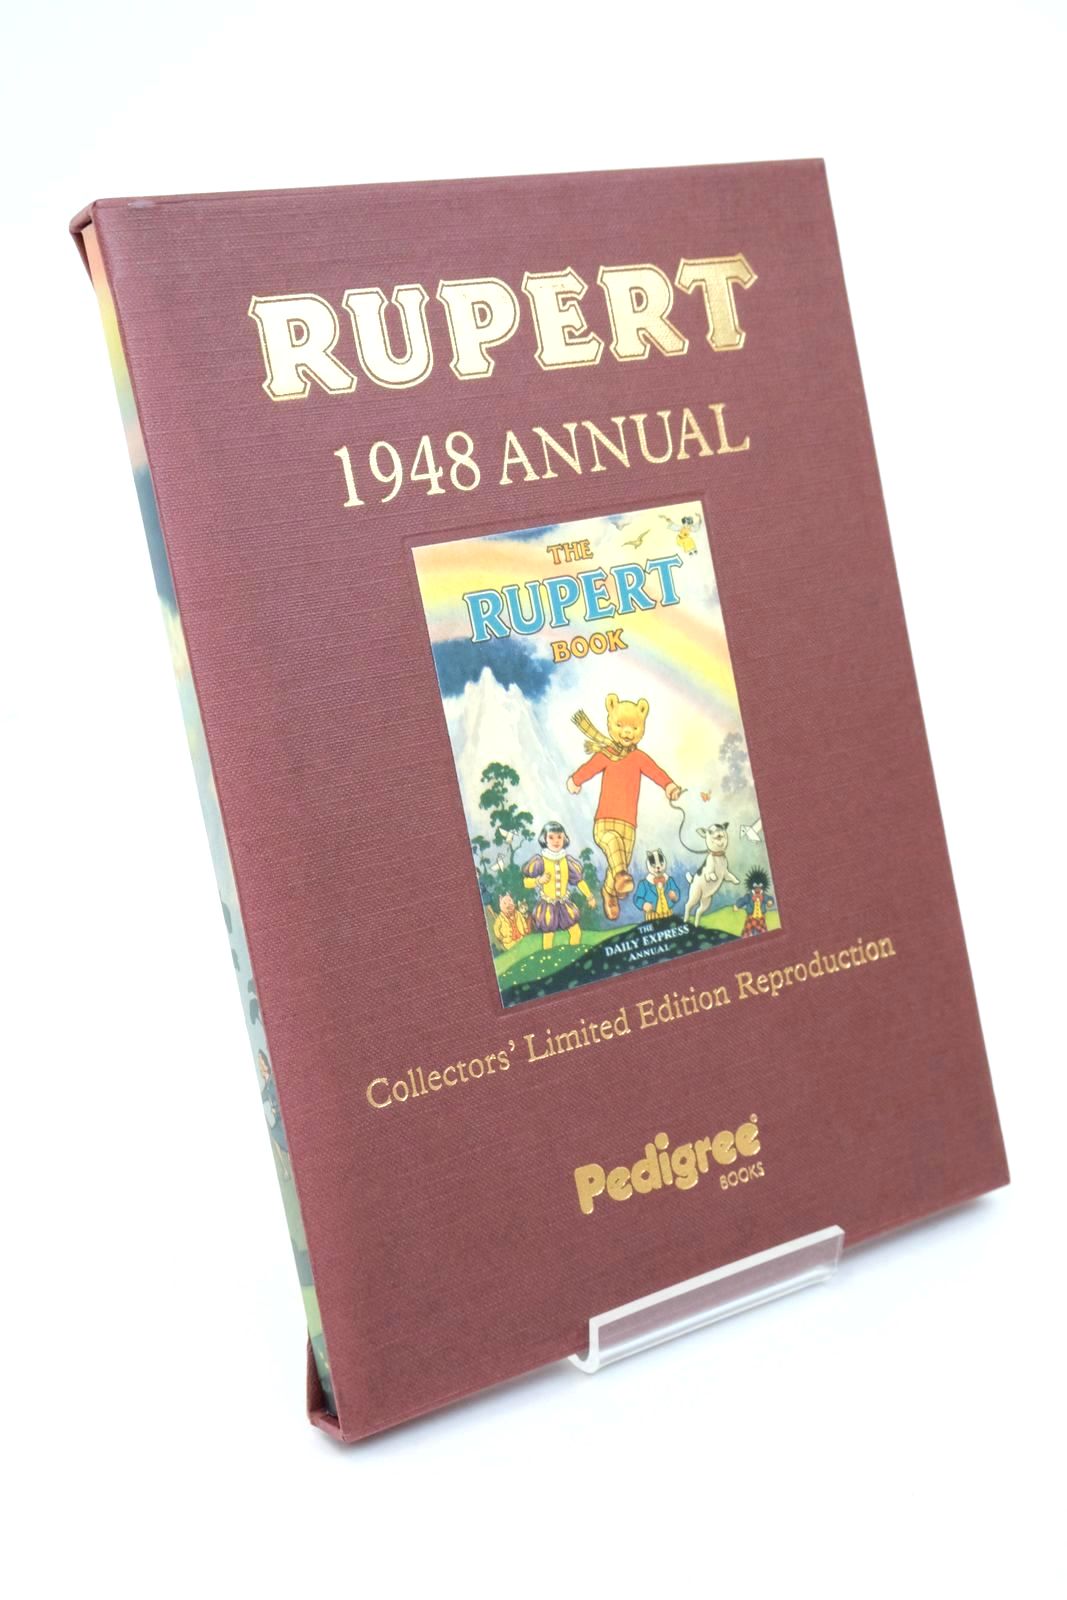 Photo of RUPERT ANNUAL 1948 (FACSIMILE) - THE RUPERT BOOK- Stock Number: 1322862